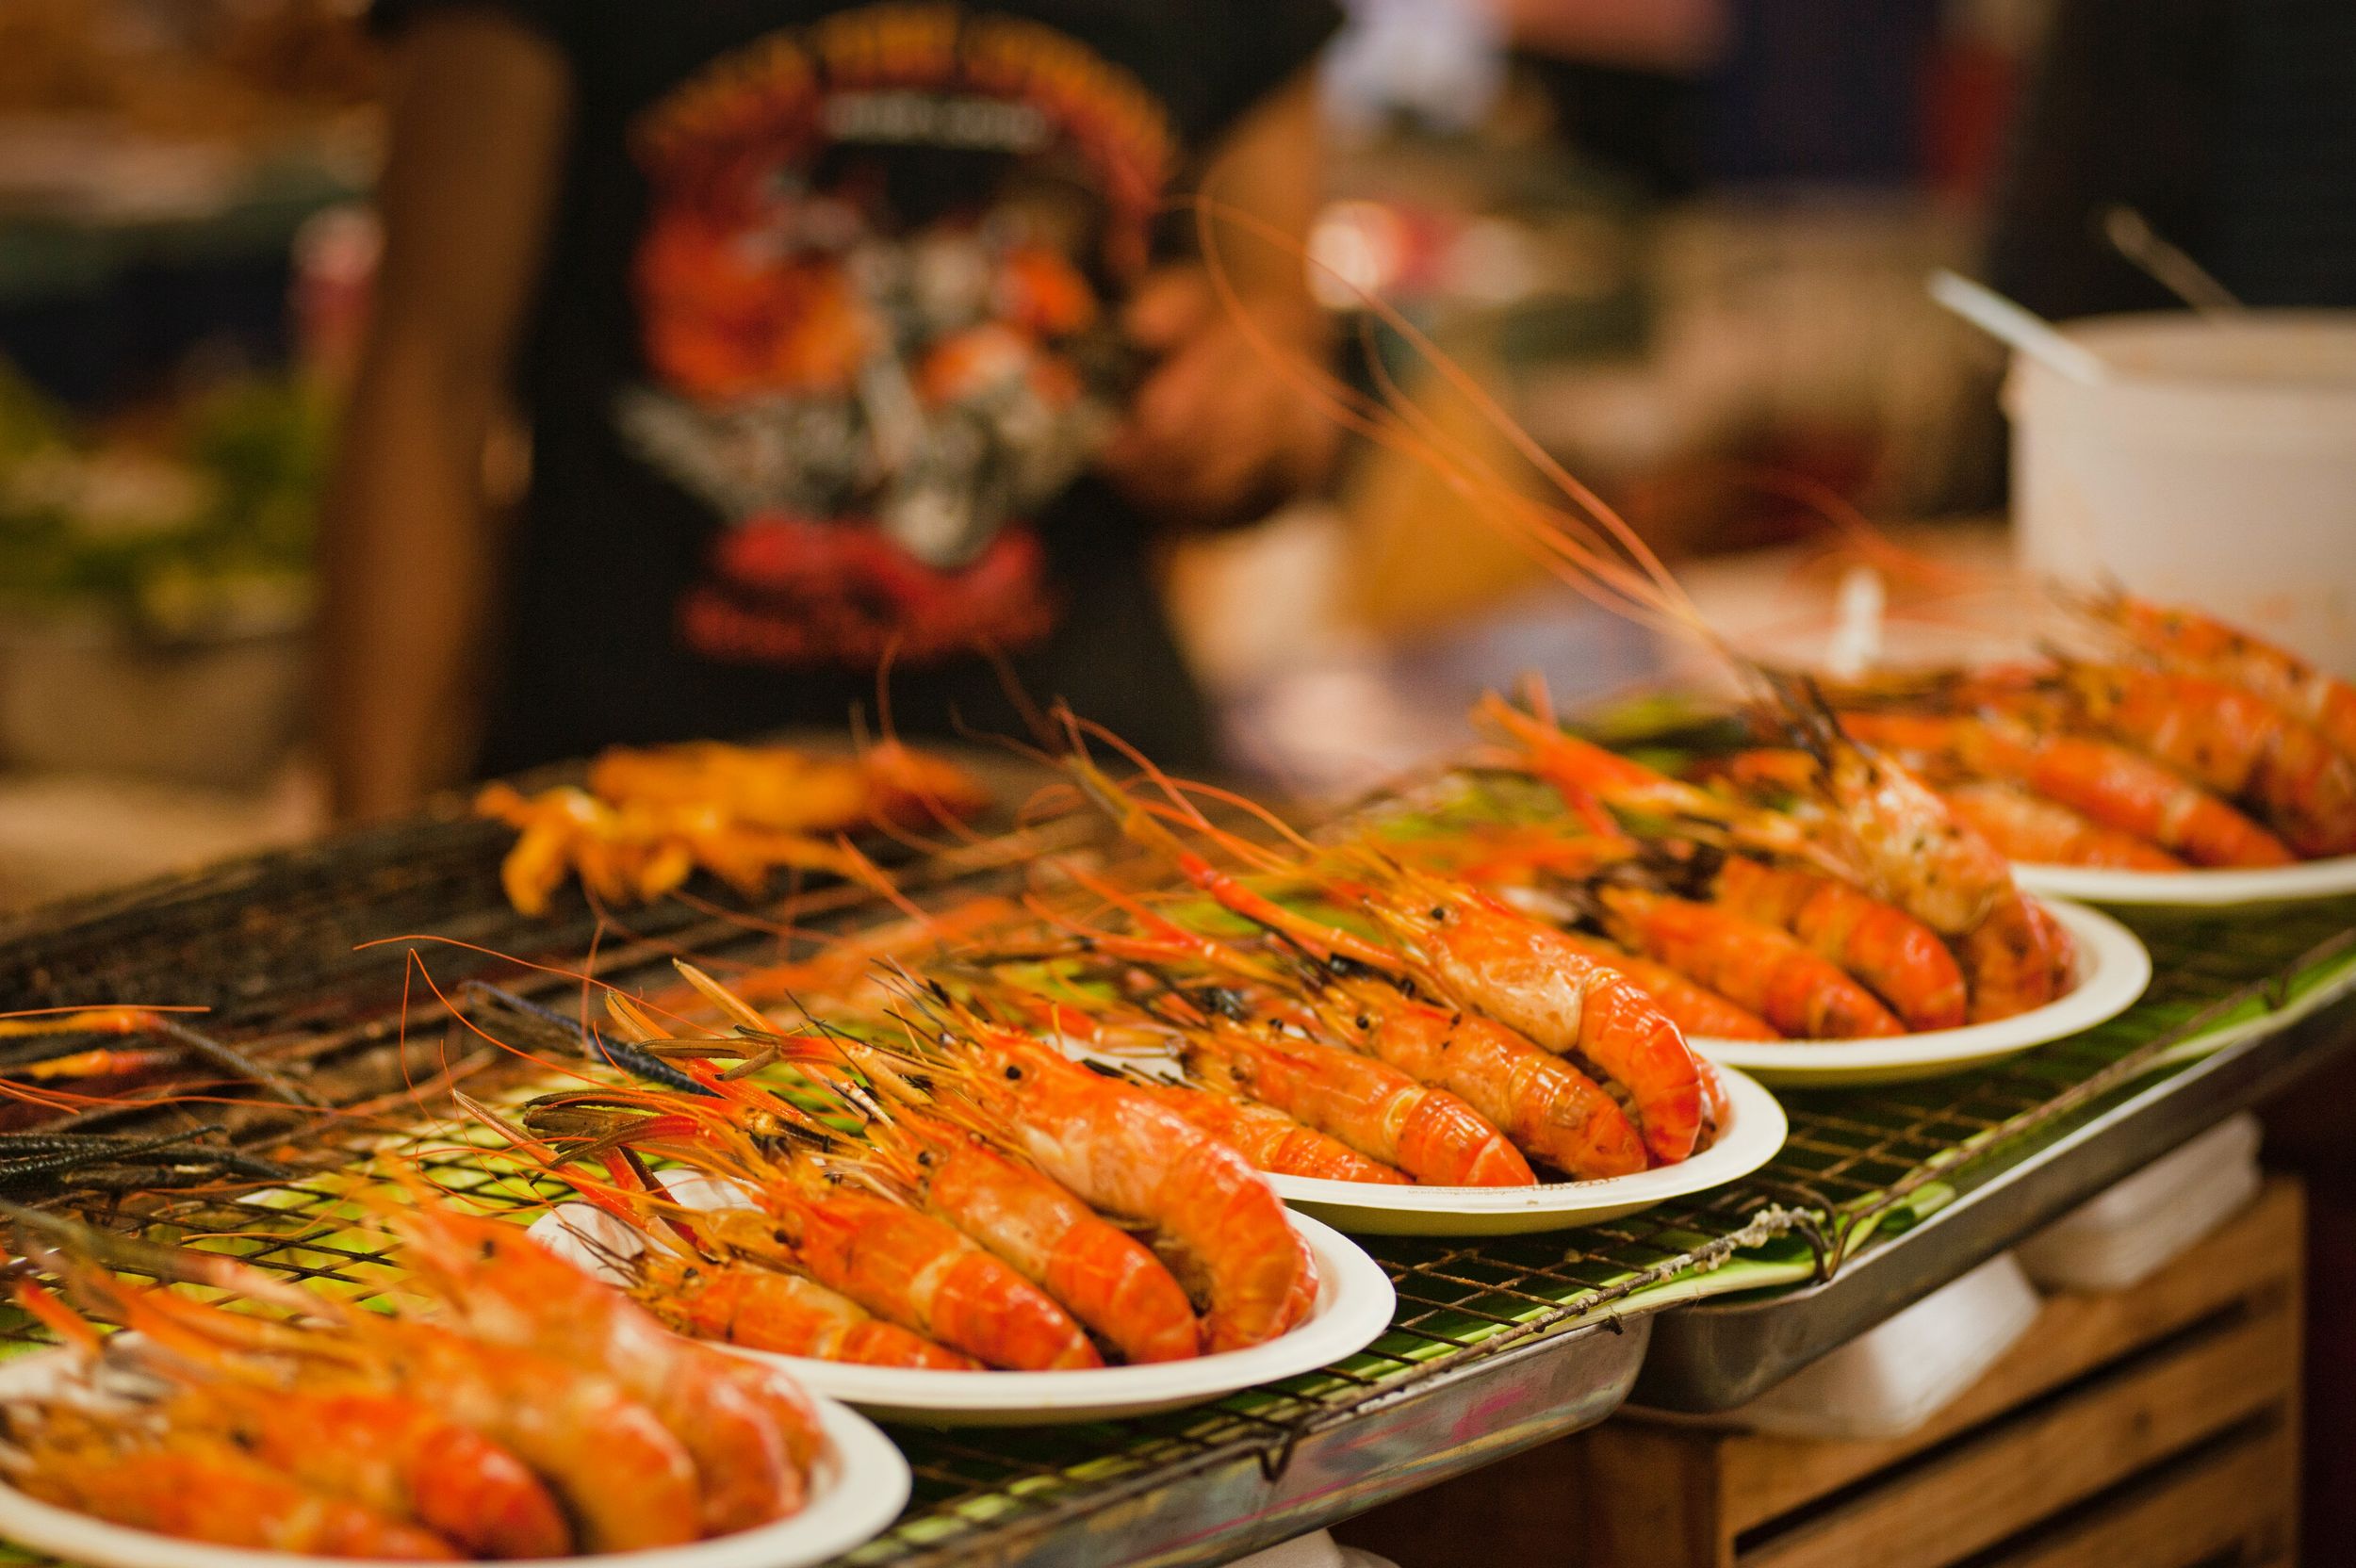 Plates of cooked shrimp at Seafood booth.